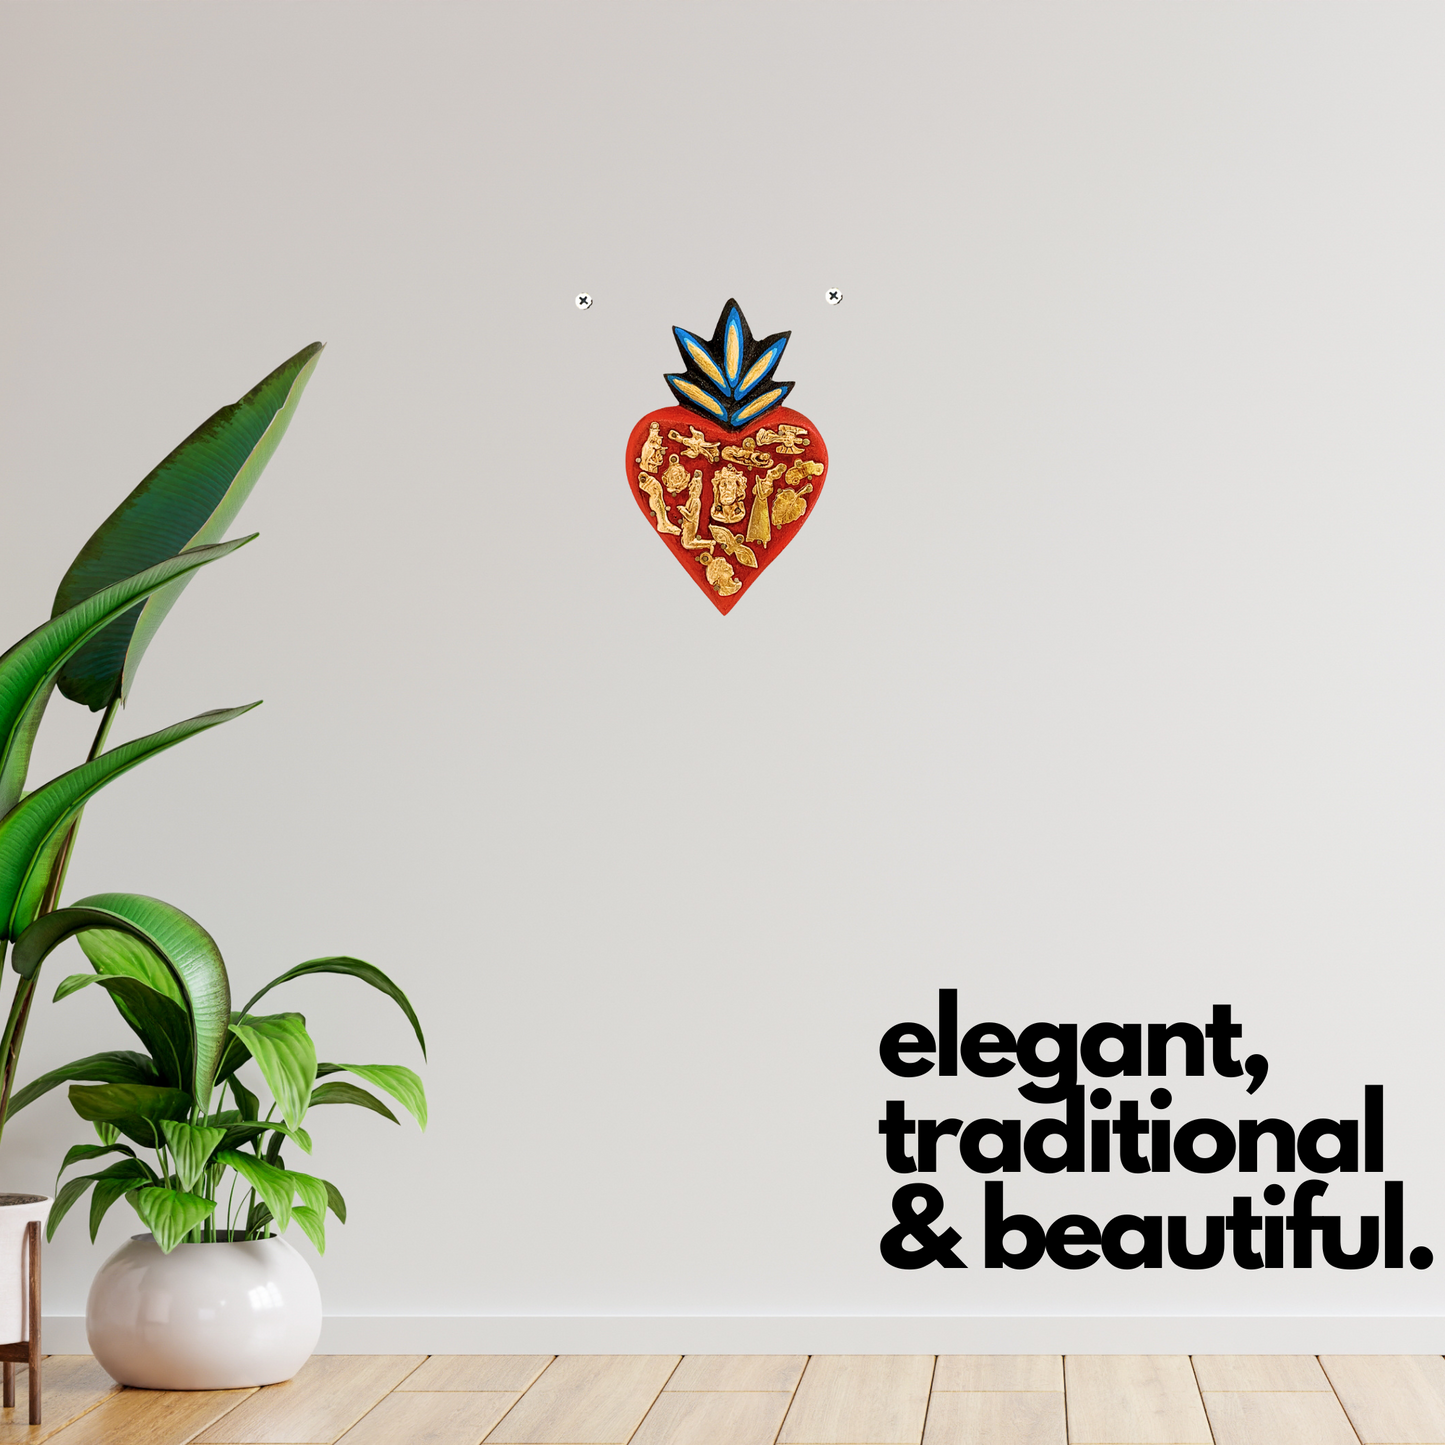 Ex Voto Wooden Sacred Heart with Milagros, handcrafted and hand-painted by Mexican artisans, brightens up any room with its vibrant colors wall hanging art